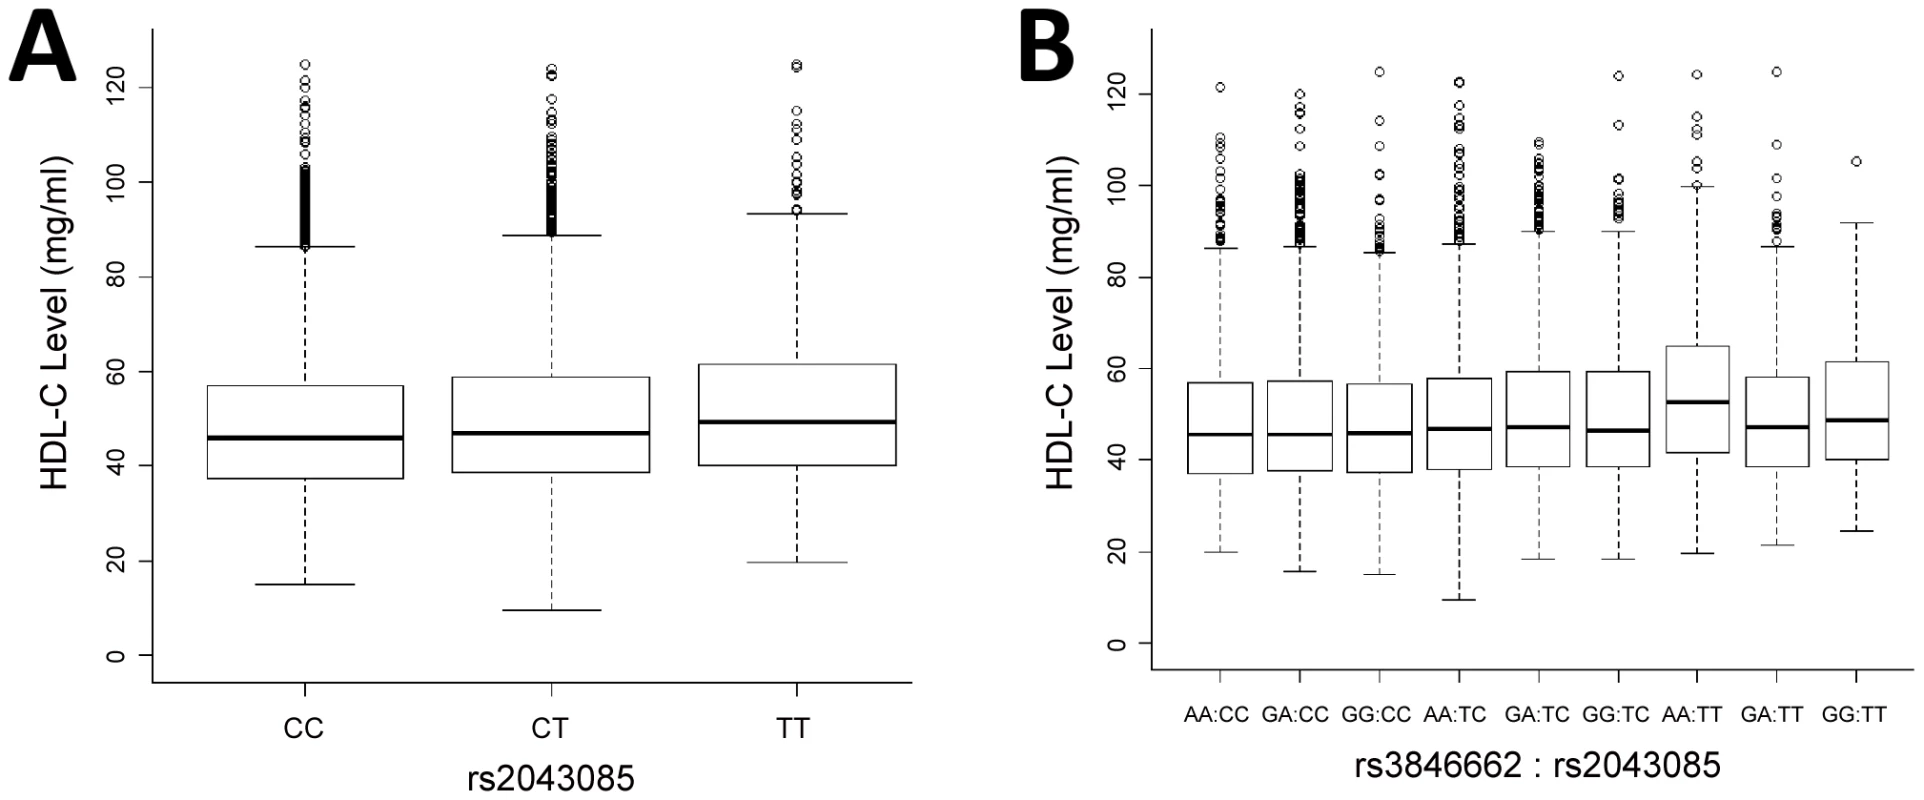 Marginal and interaction effect sizes on HDL-C level in ARIC EA cohort.